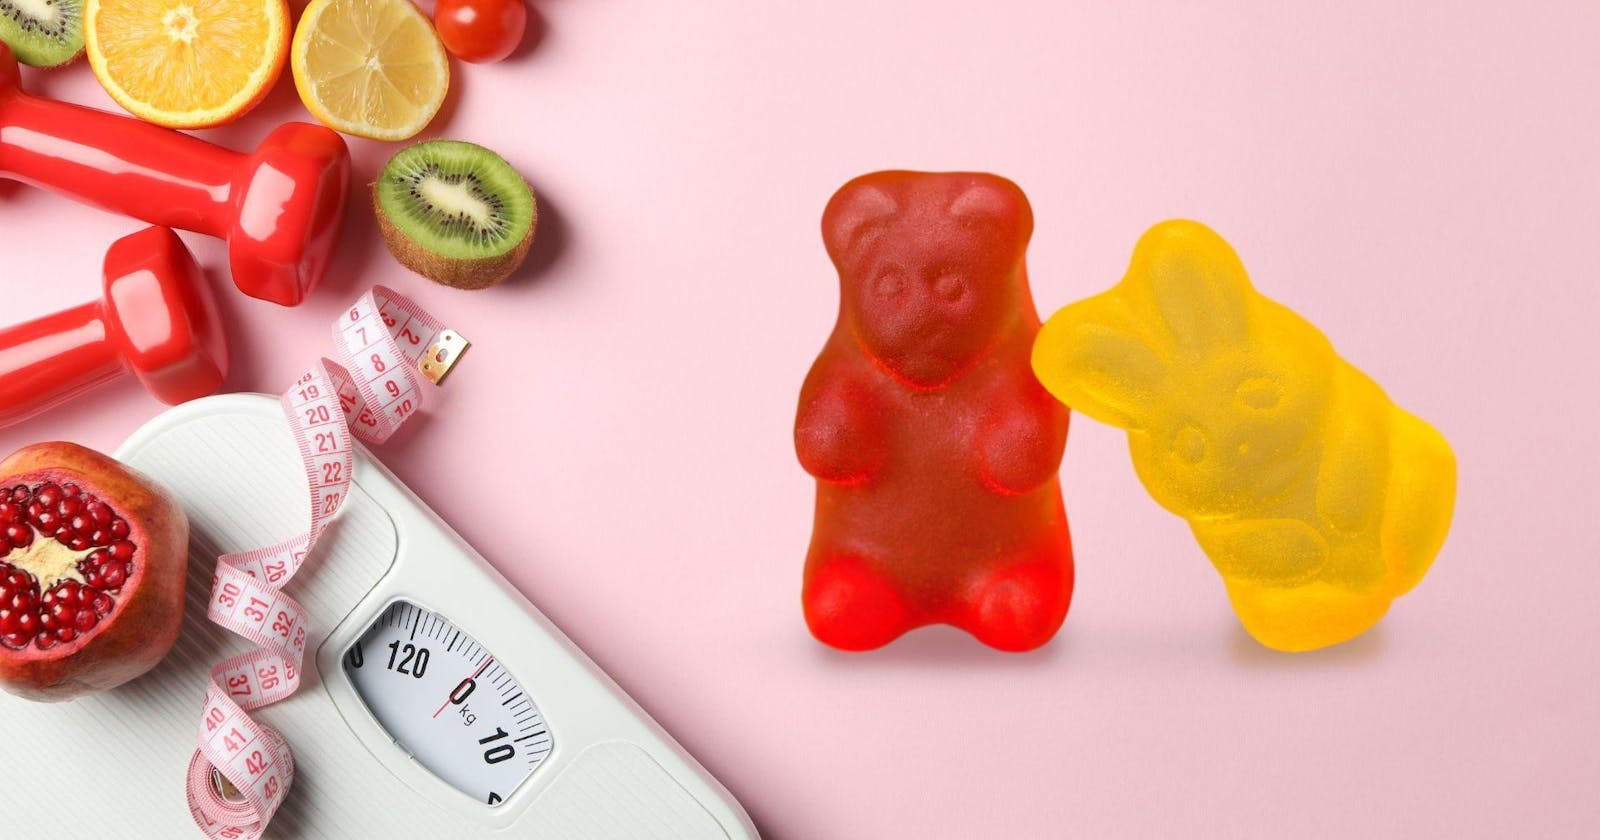 EL Toro CBD Gummies THE MOST POPULAR CBD GUMMY BEARS IN UNITED STATES READ HERE REVIEWS, BENEFITS, SIDE EFFECT, INGREDIENTS, DOES IT REALLY WORK? IS